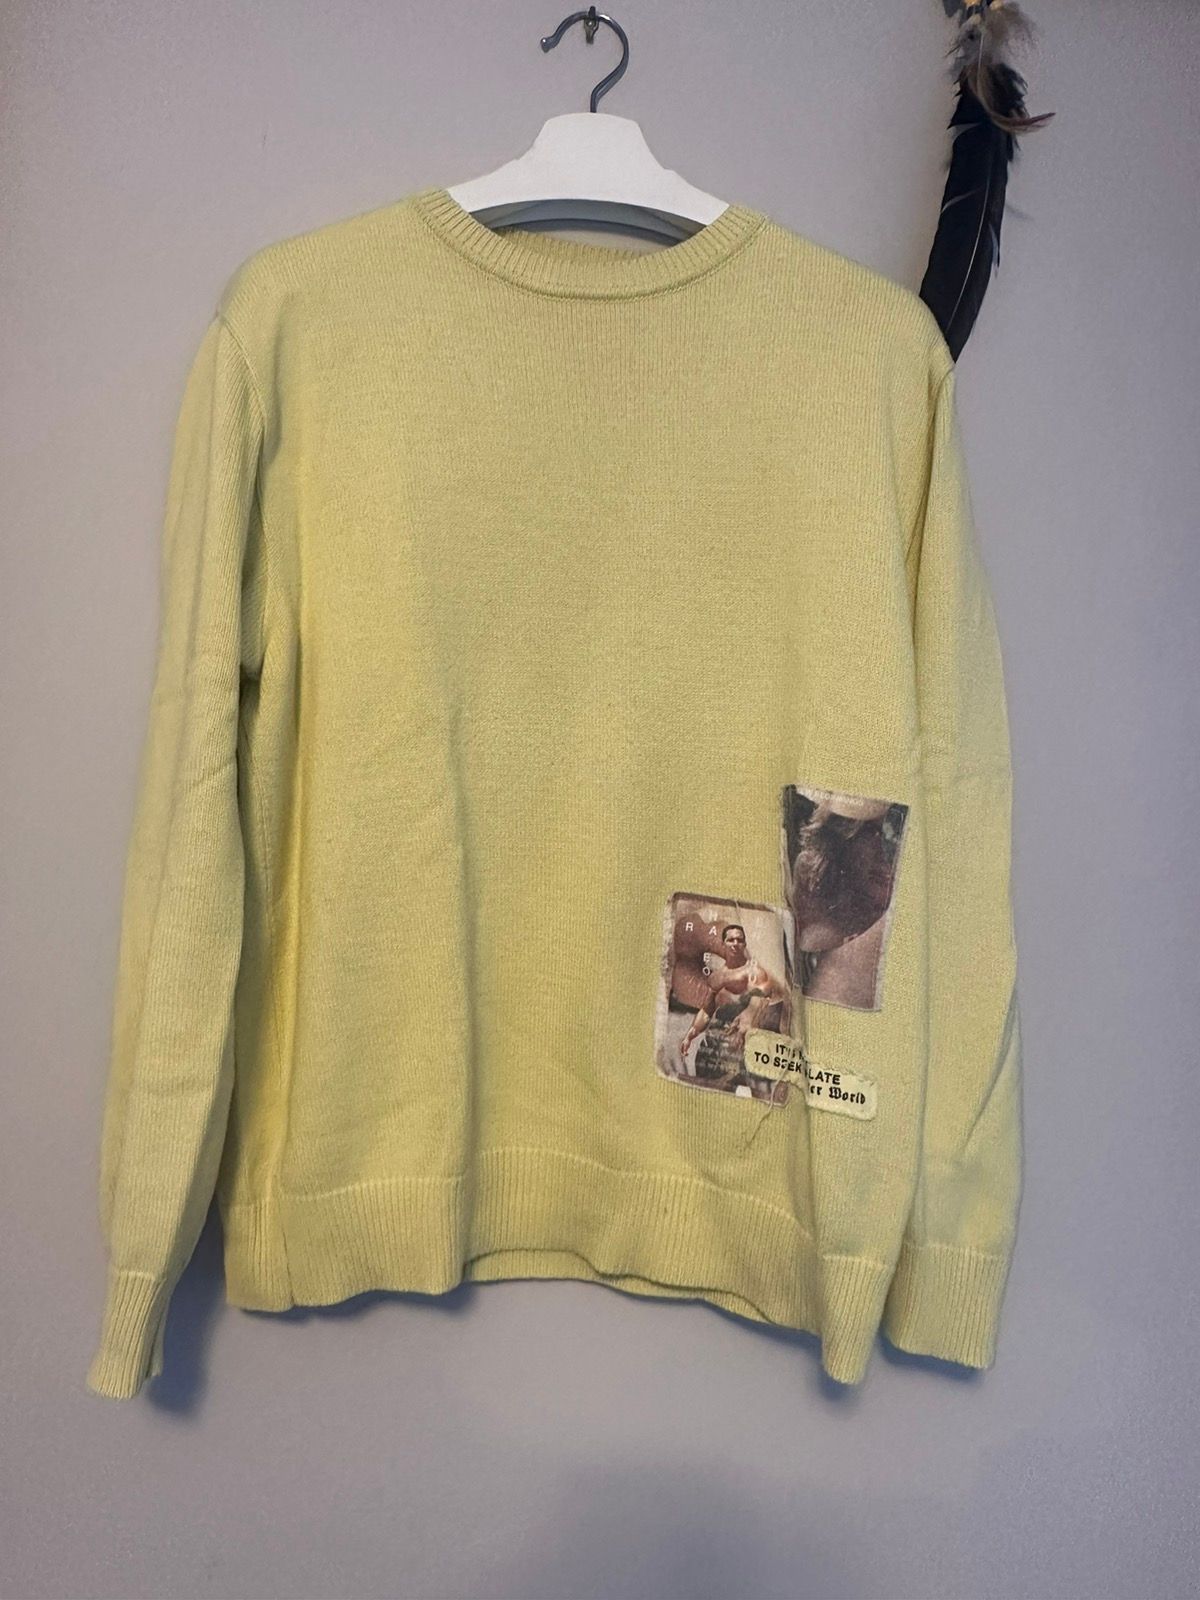 Misbhv MISBHV Sweater Mustard Size M 100% Authentic Size US M / EU 48-50 / 2 - 1 Preview